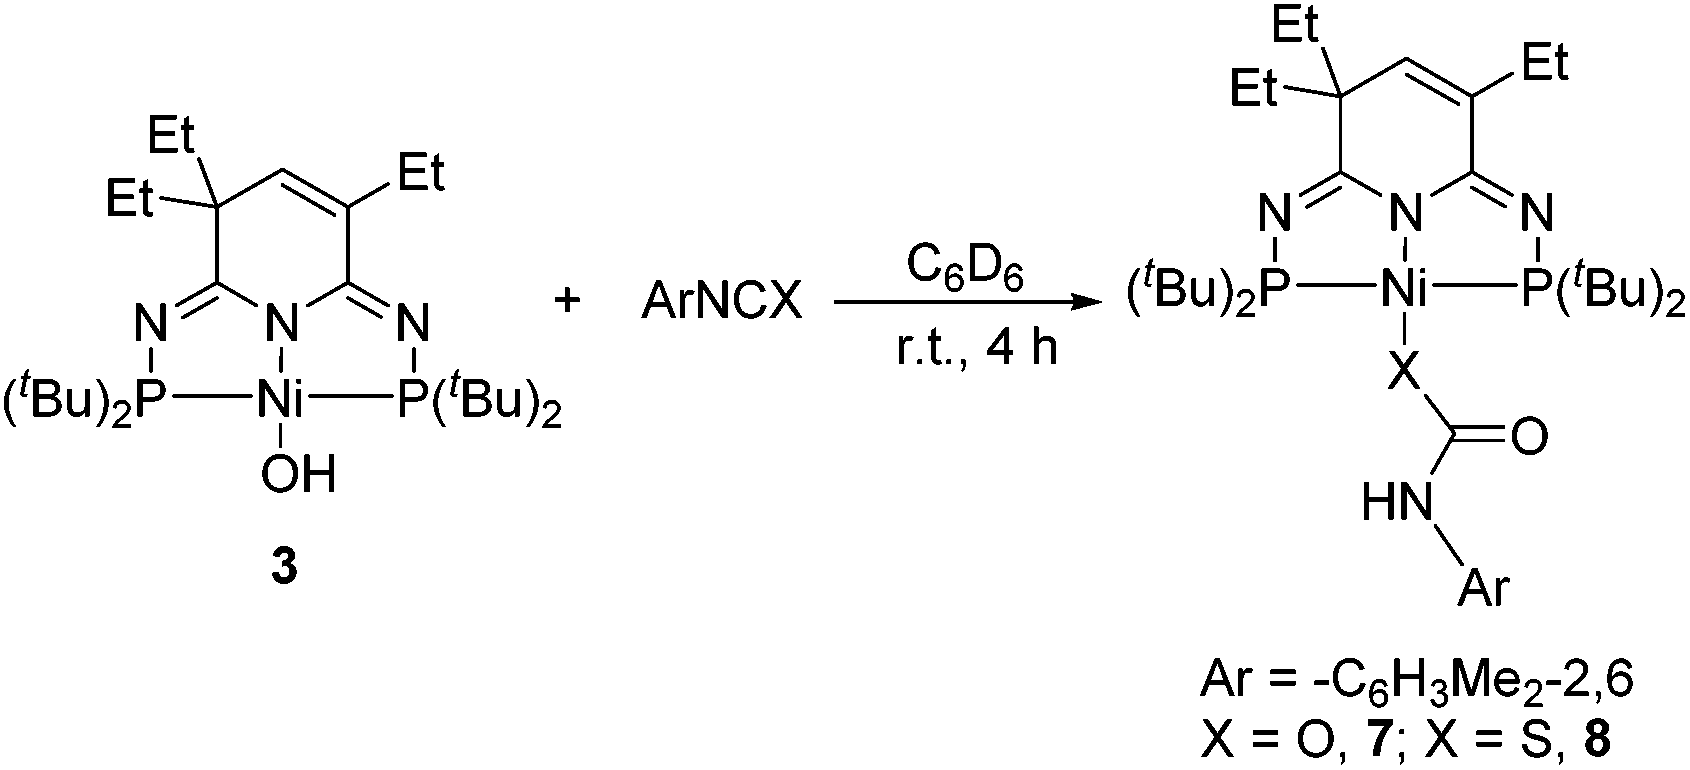 Monomeric nickel hydroxide stabilized by a sterically demanding 